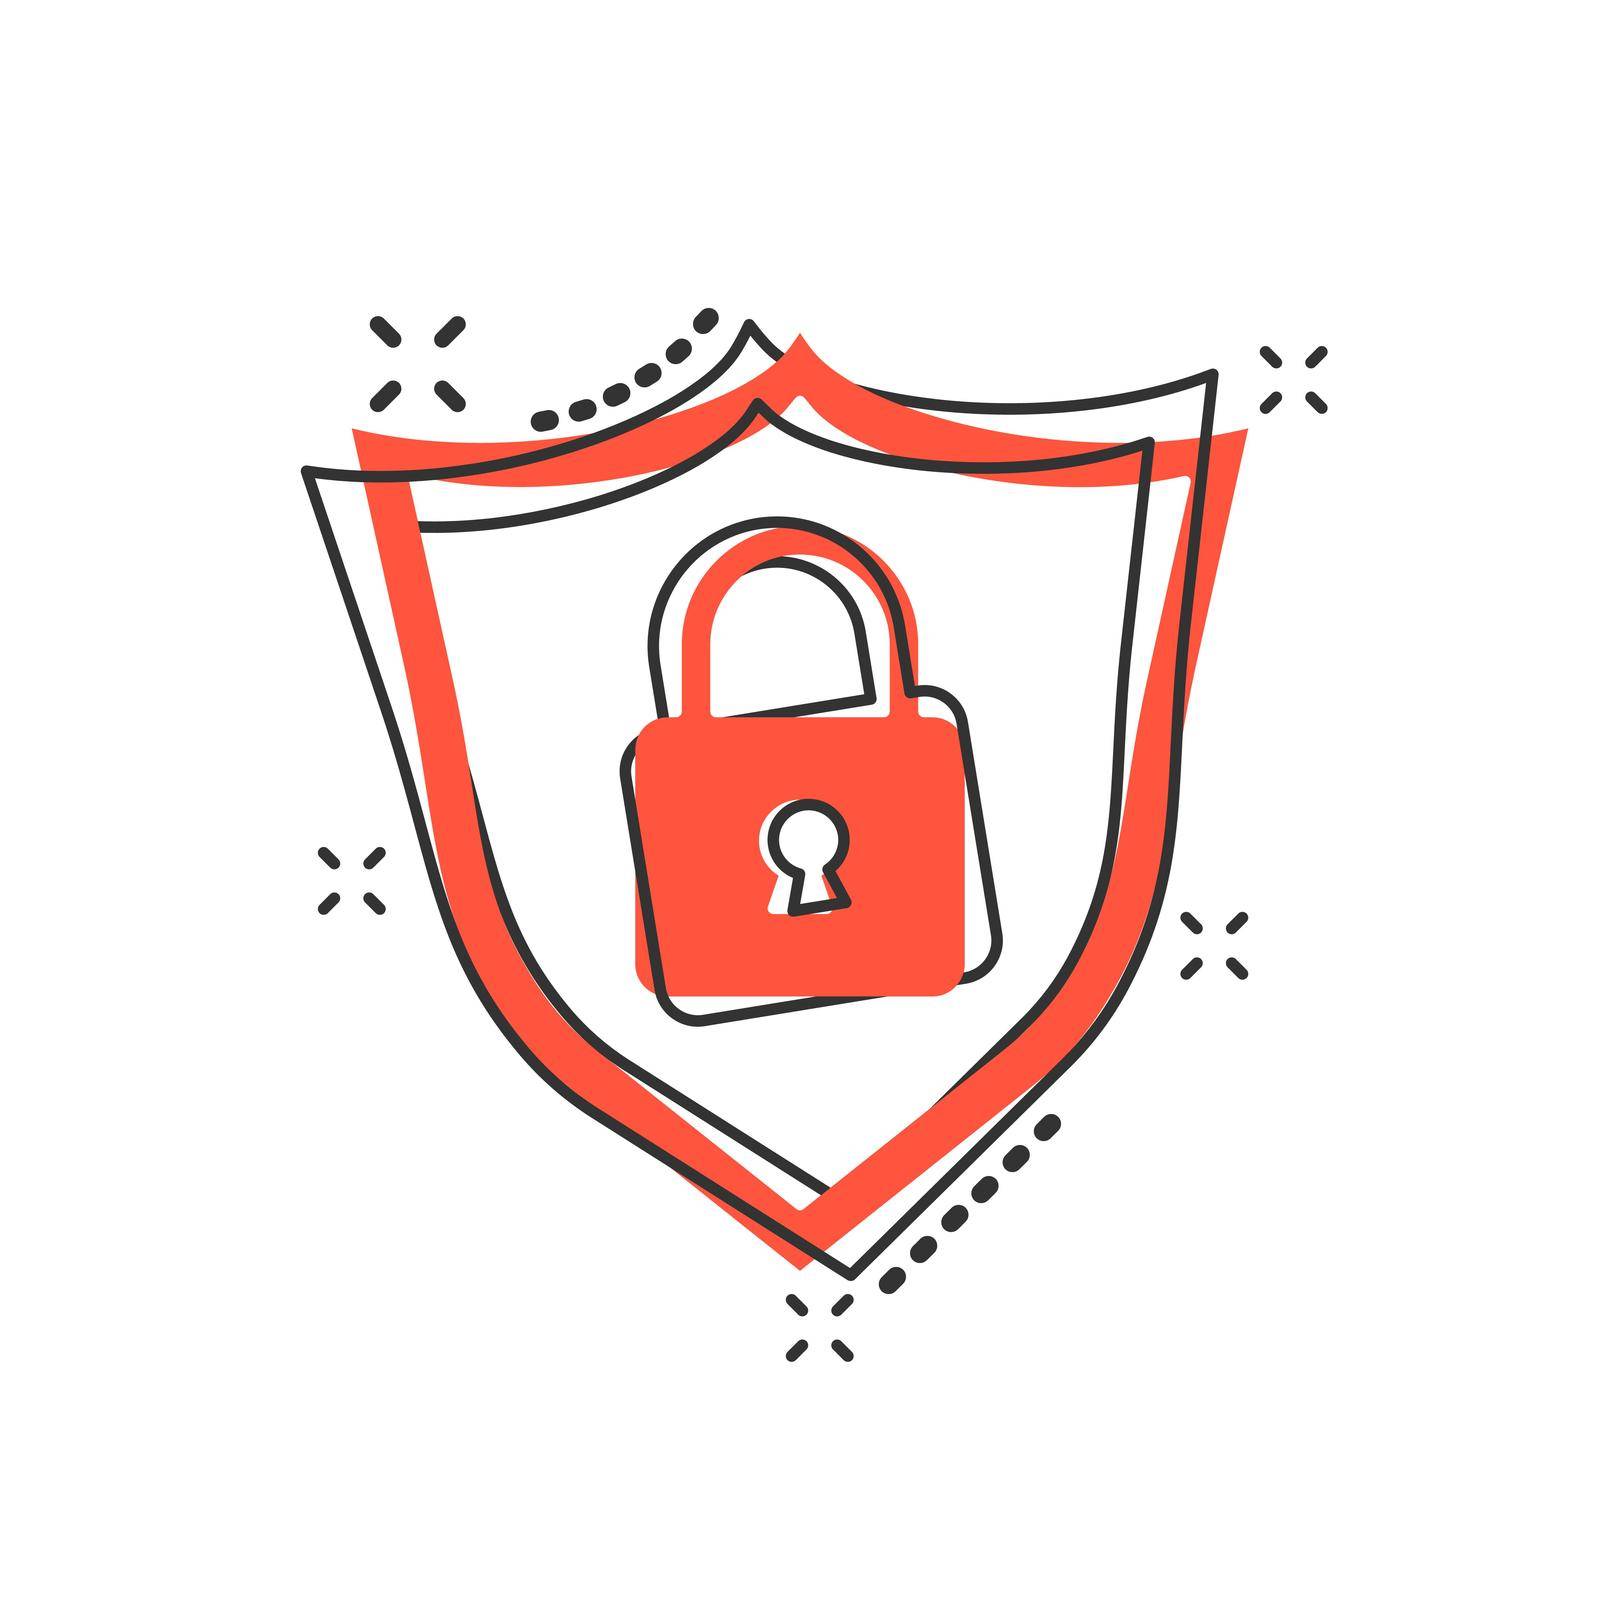 Vector cartoon lock with shield security icon in comic style. Padlock sign illustration pictogram. Shield business splash effect concept. by LysenkoA